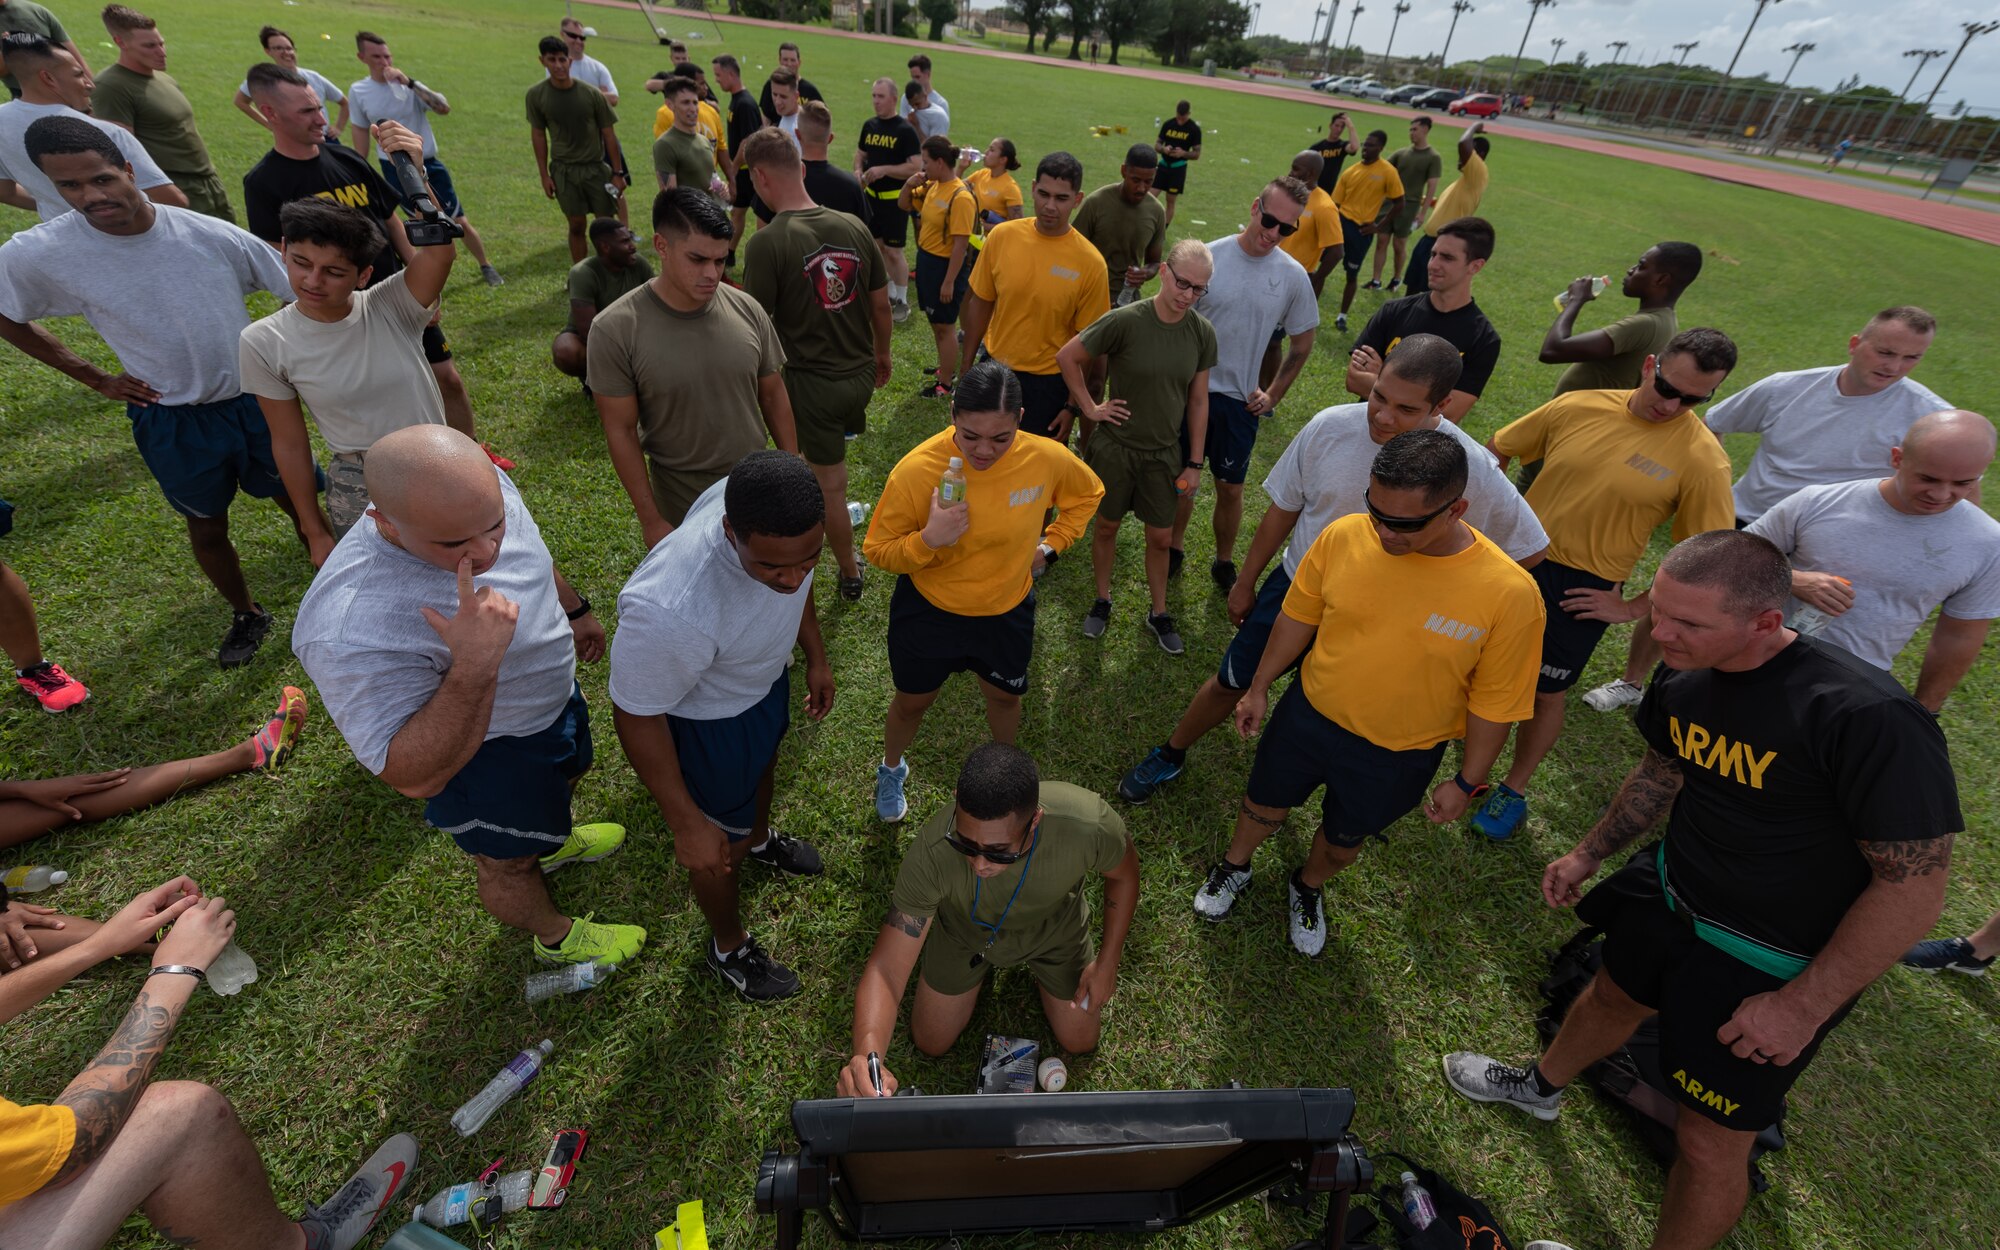 U.S. Marine Corps 1st Sgt. Michael Collins, Okinawa Joint Experience instructor, updates each team’s score during the Okinawa Joint Fitness Challenge Sept. 26, 2018, at Kadena Air Base, Japan. After calculating points from the push-up challenge, combat fitness challenge and tug-of-war, the Green Team was determined the winner of the OJFC. (U.S. Air Force photo by Staff Sgt. Micaiah Anthony)